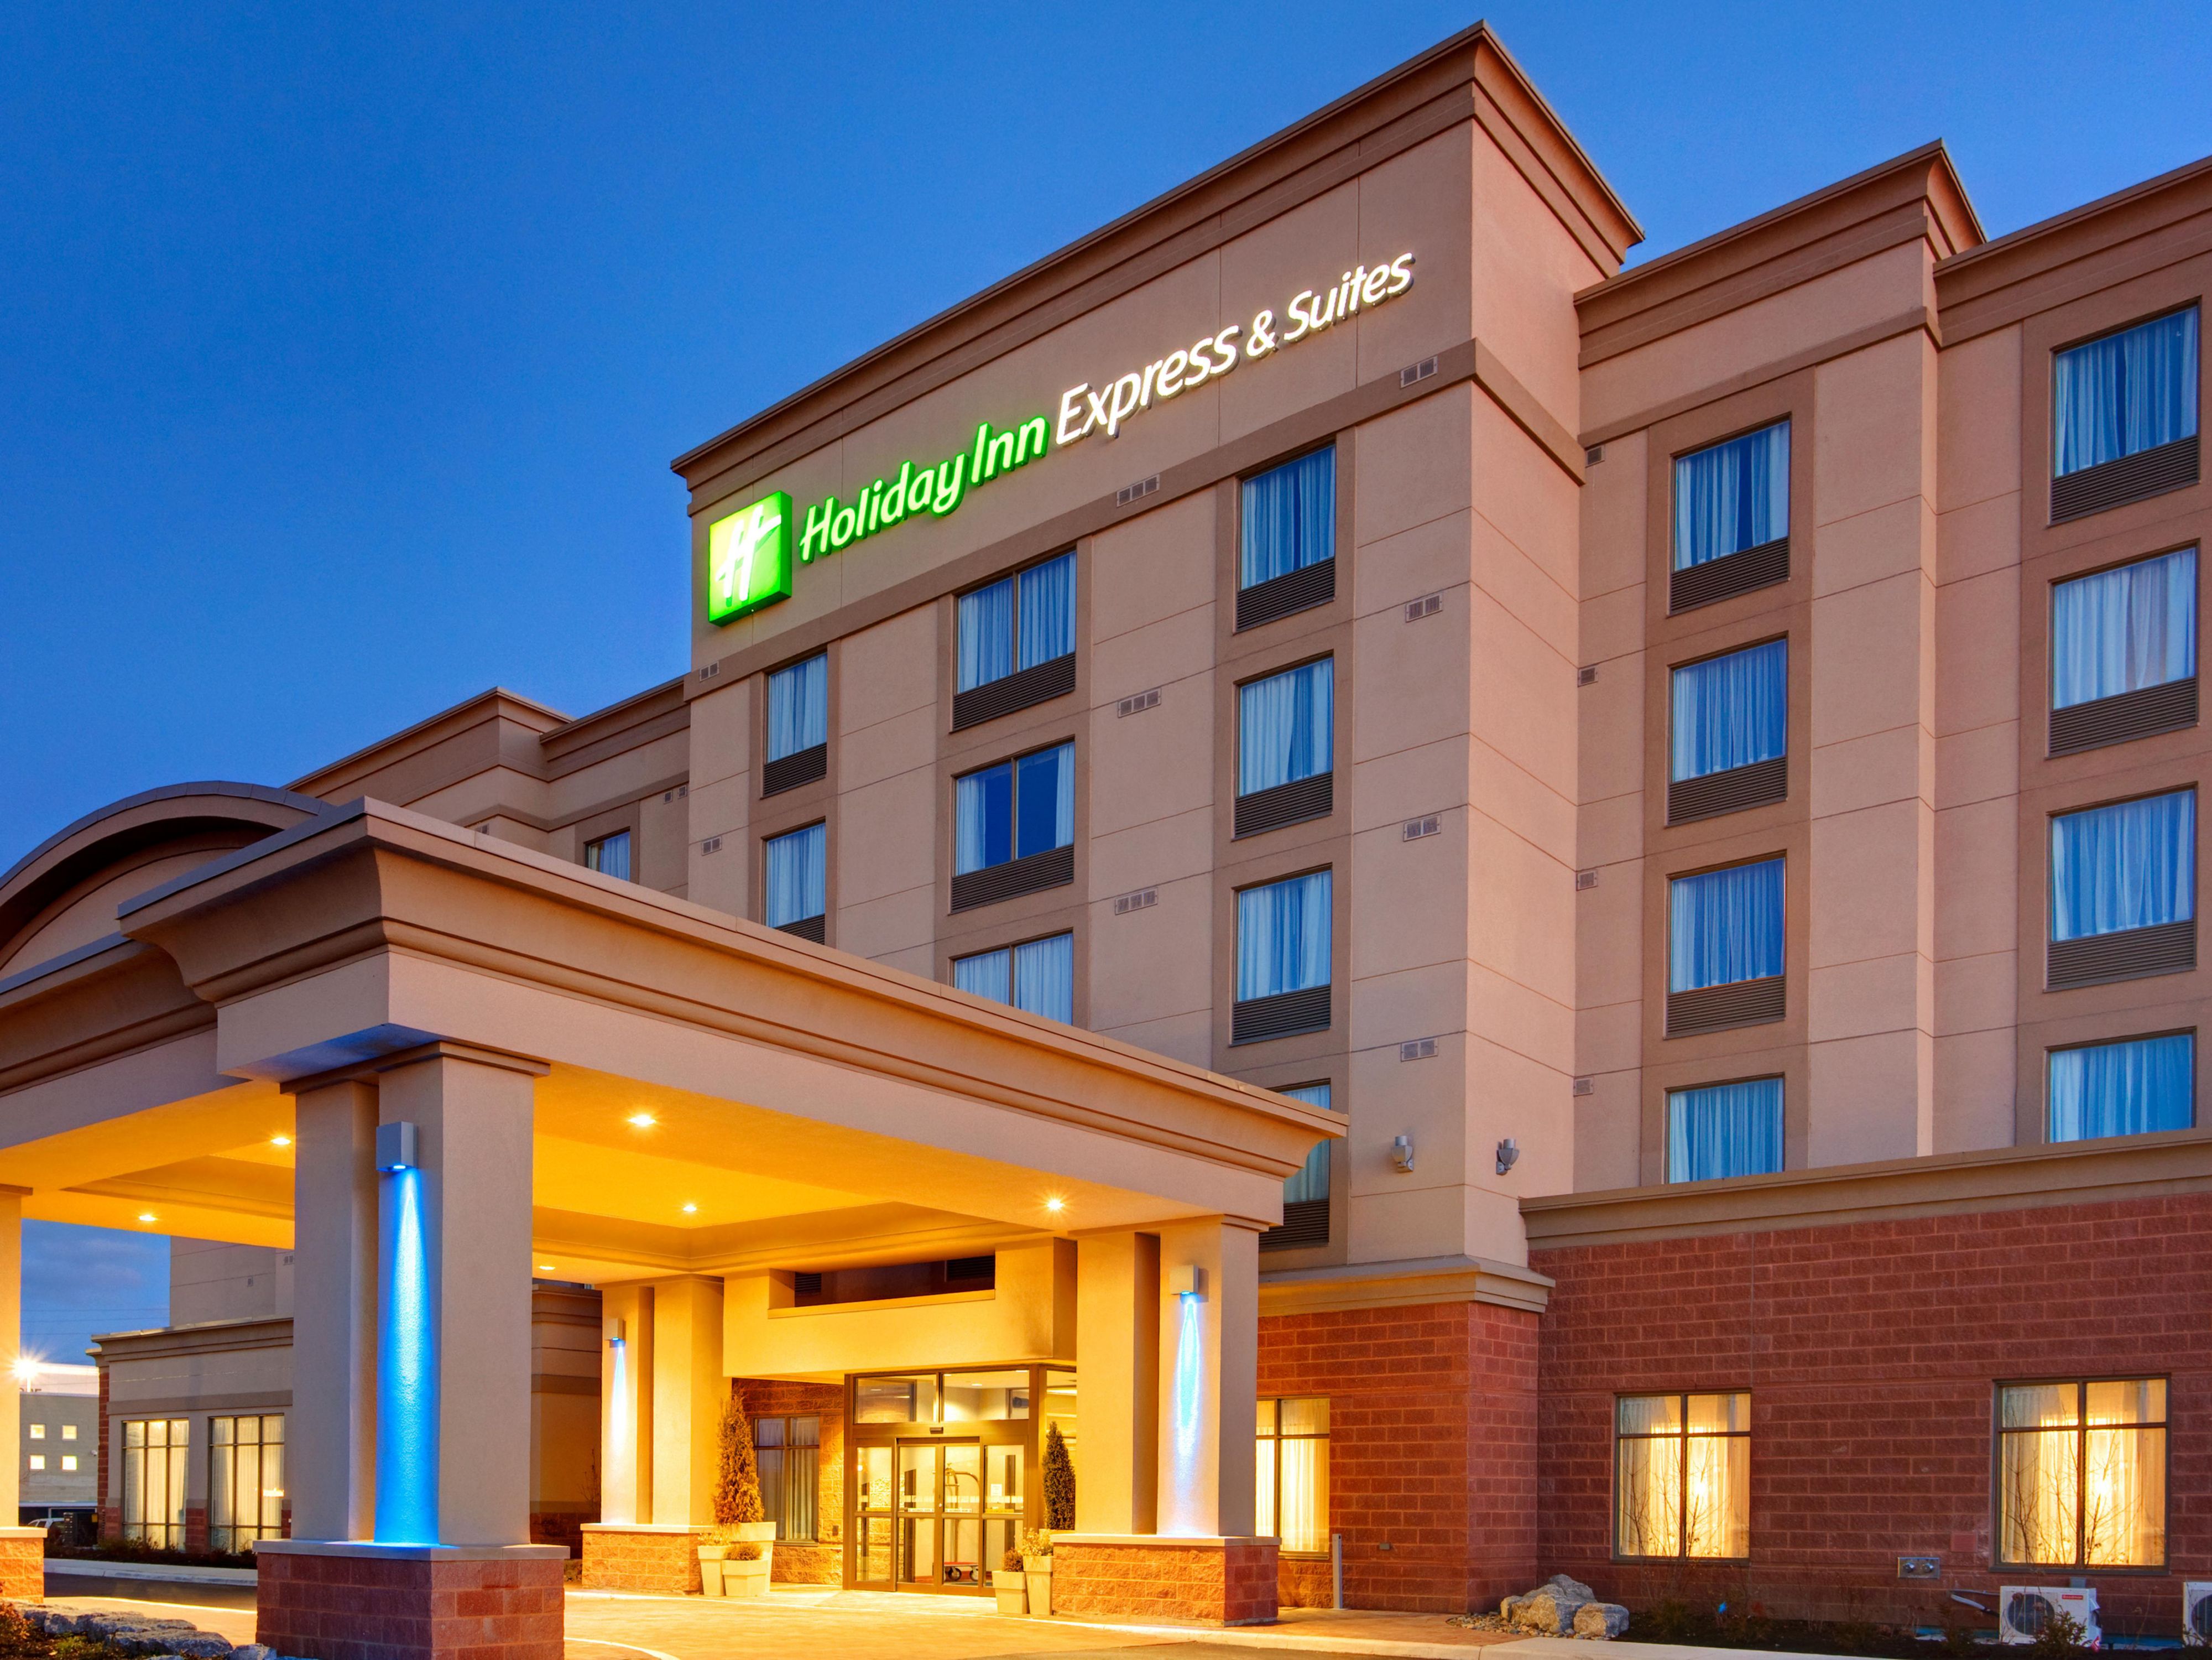 Holiday Inn Express And Suites Newmarket 2532043767 4x3